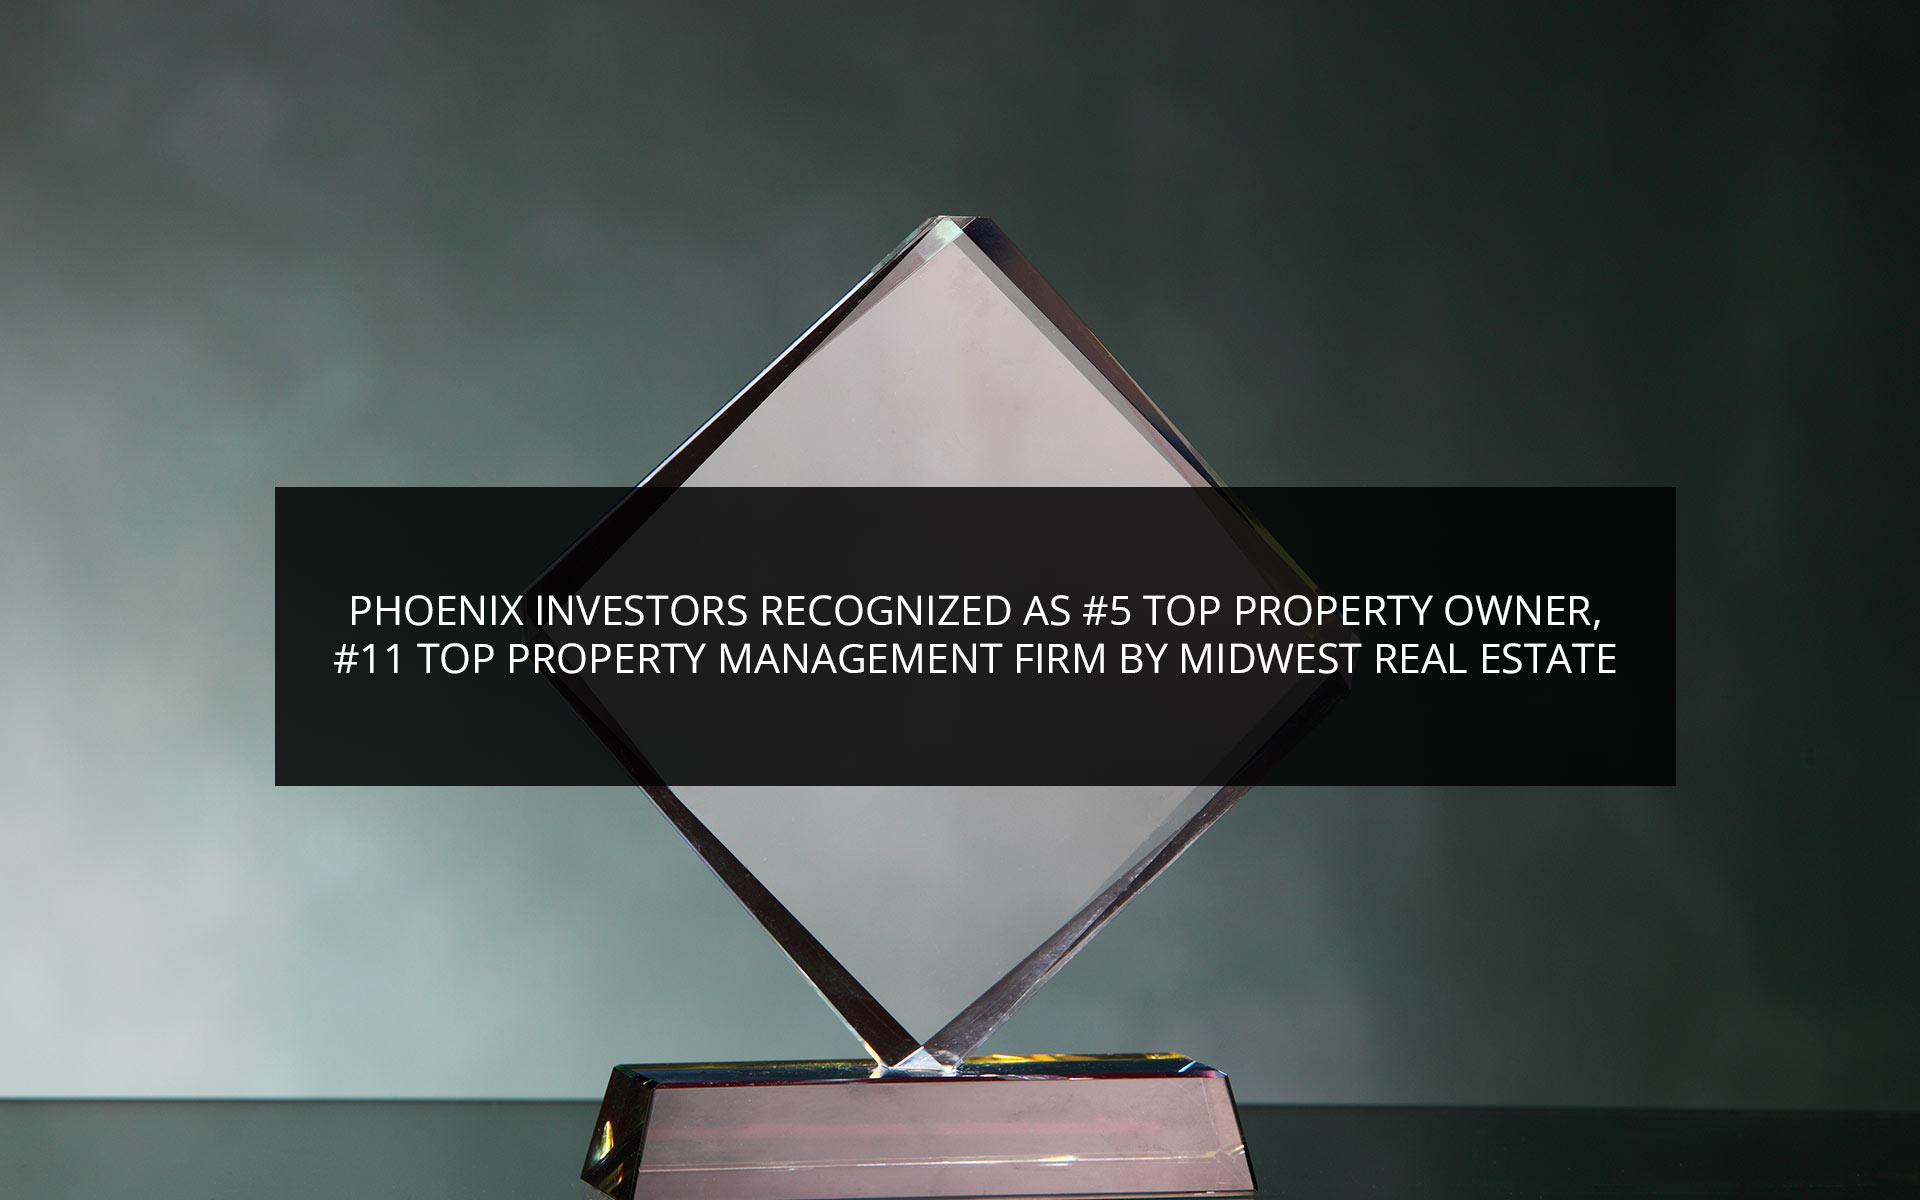 Phoenix Investors Recognized As #5 Top Property Owner, #11 Top Property Management Firm by Midwest Real Estate News